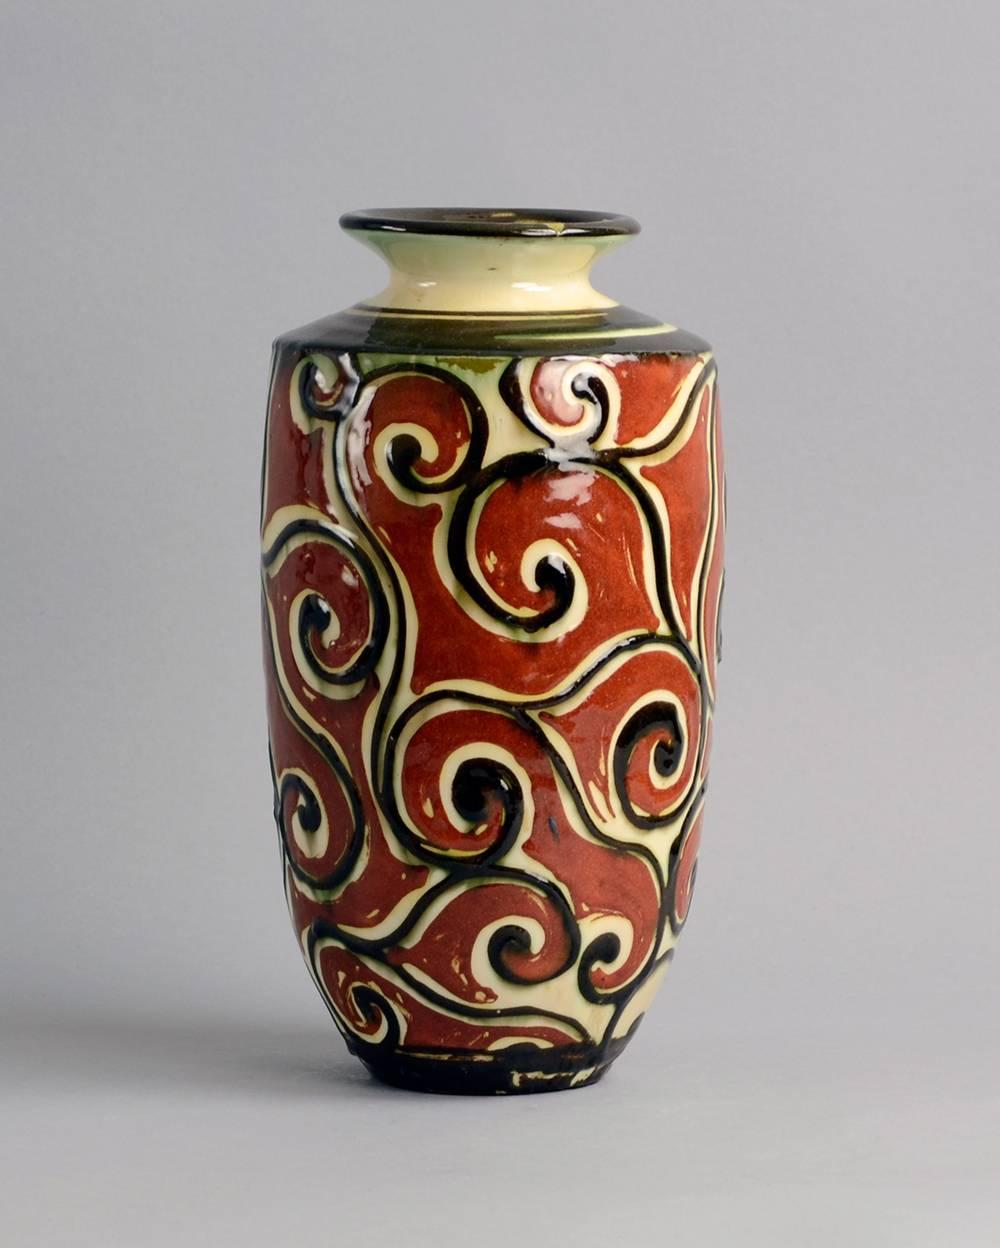 Sophie Lundstien for Herman A. Kahler Keramik.
Stoneware vase with hand-painted decoration in glossy red-brown, dark brown and cream glaze, 1920s.
Measures: Height 10 1/2